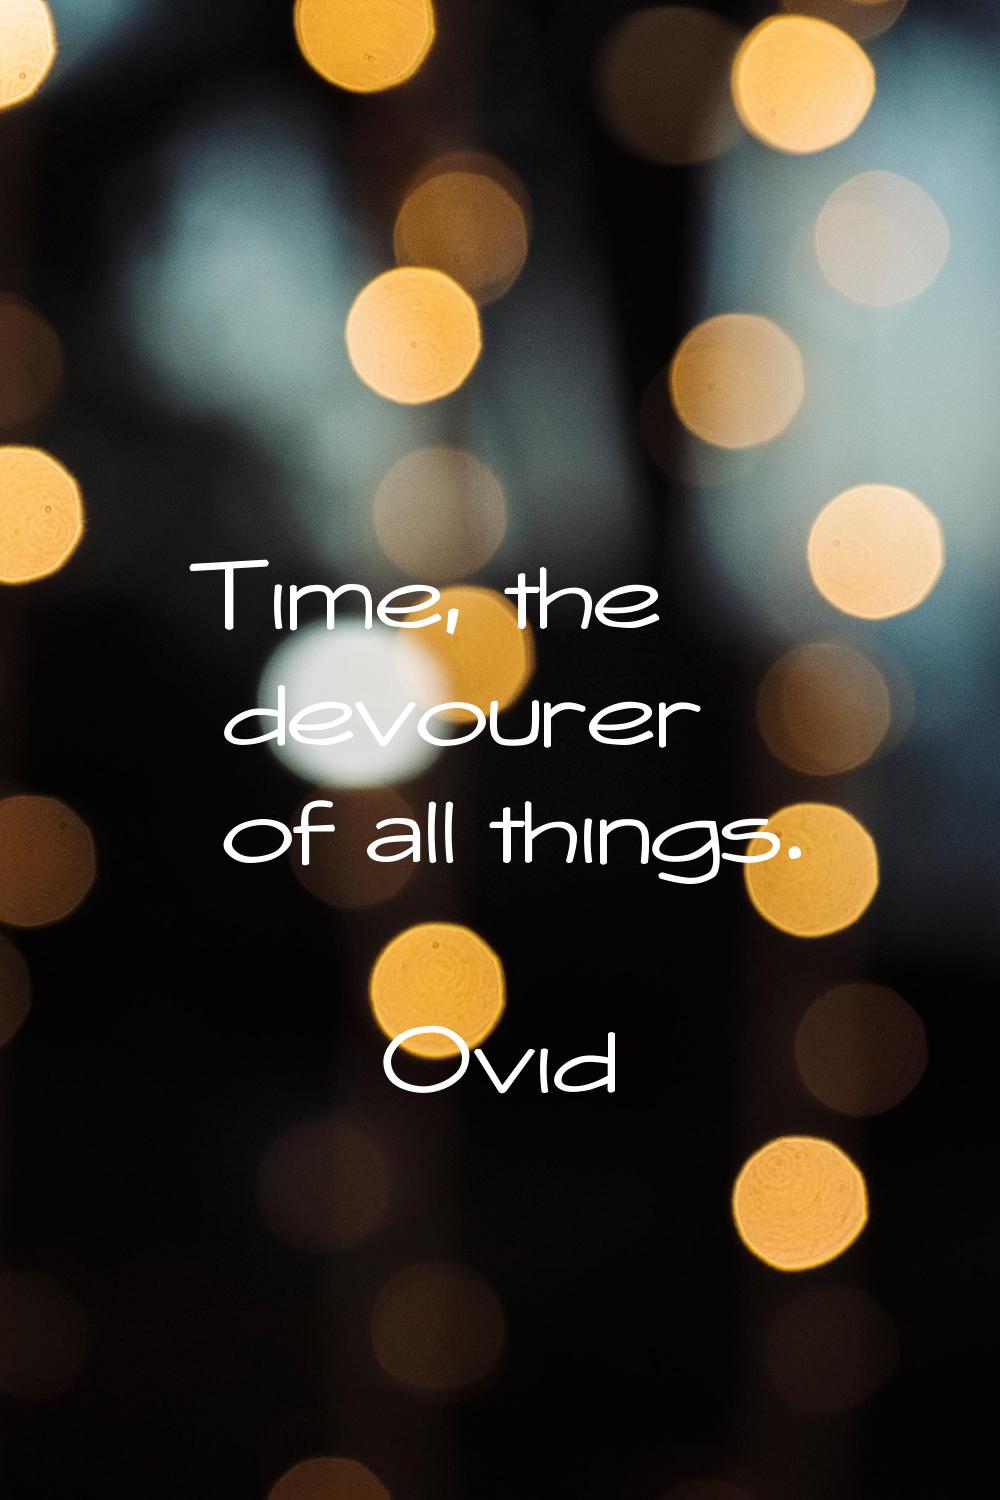 Time, the devourer of all things.